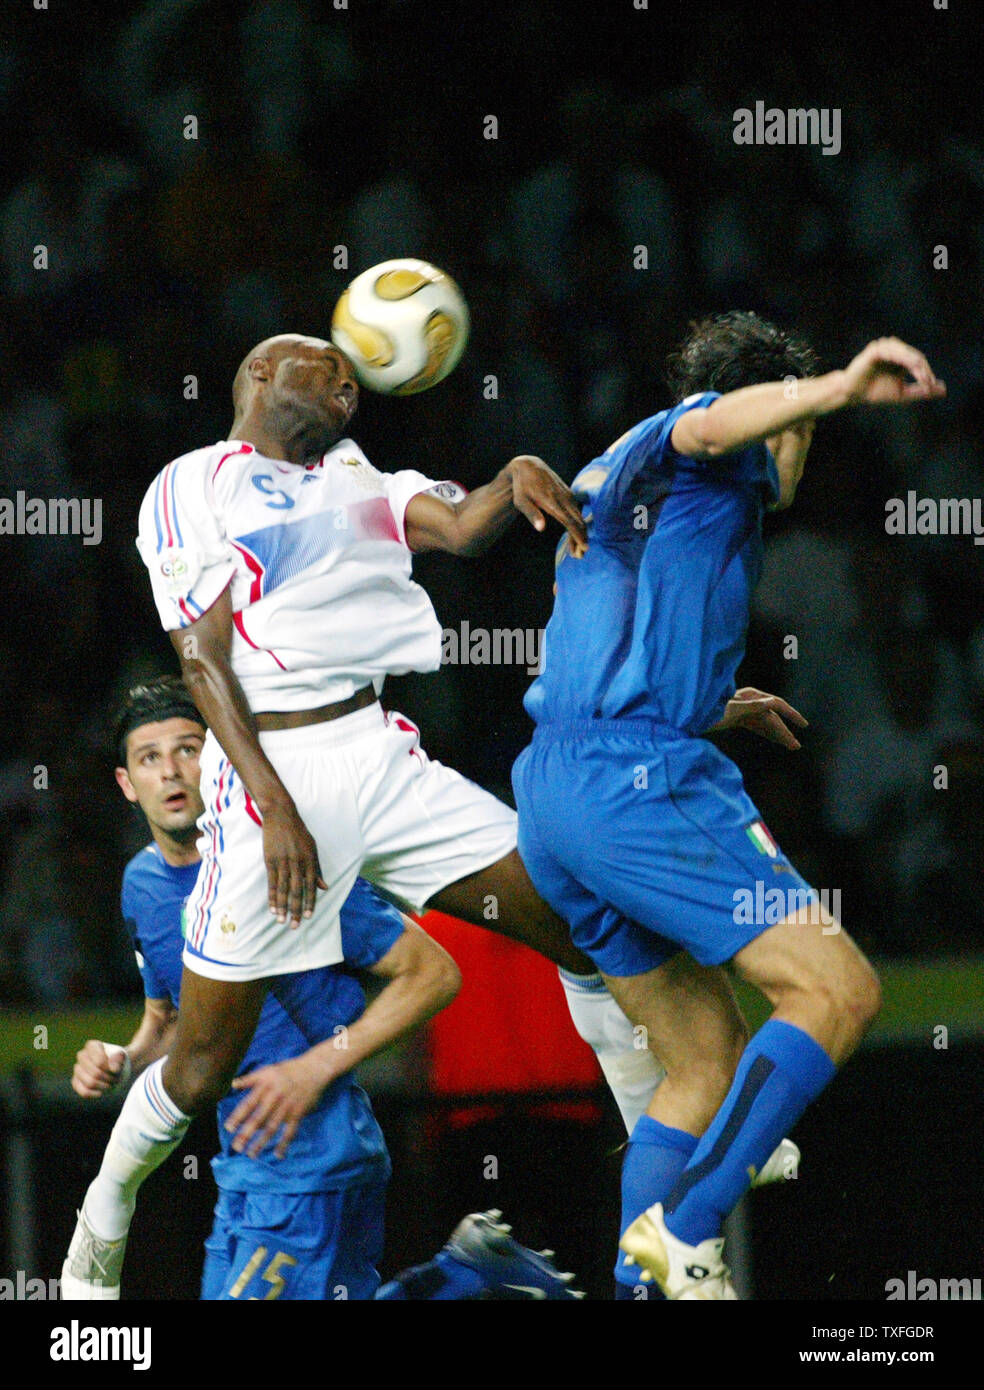 France's William Gallas (5) heads the ball against Italy's Vicenzo Iaquinta in the World Cup soccer final in Berlin, Germany on July 9, 2006. Italy is World Champion after defeating France 5-3. (UPI Photo/Arthur Thill) Stock Photo